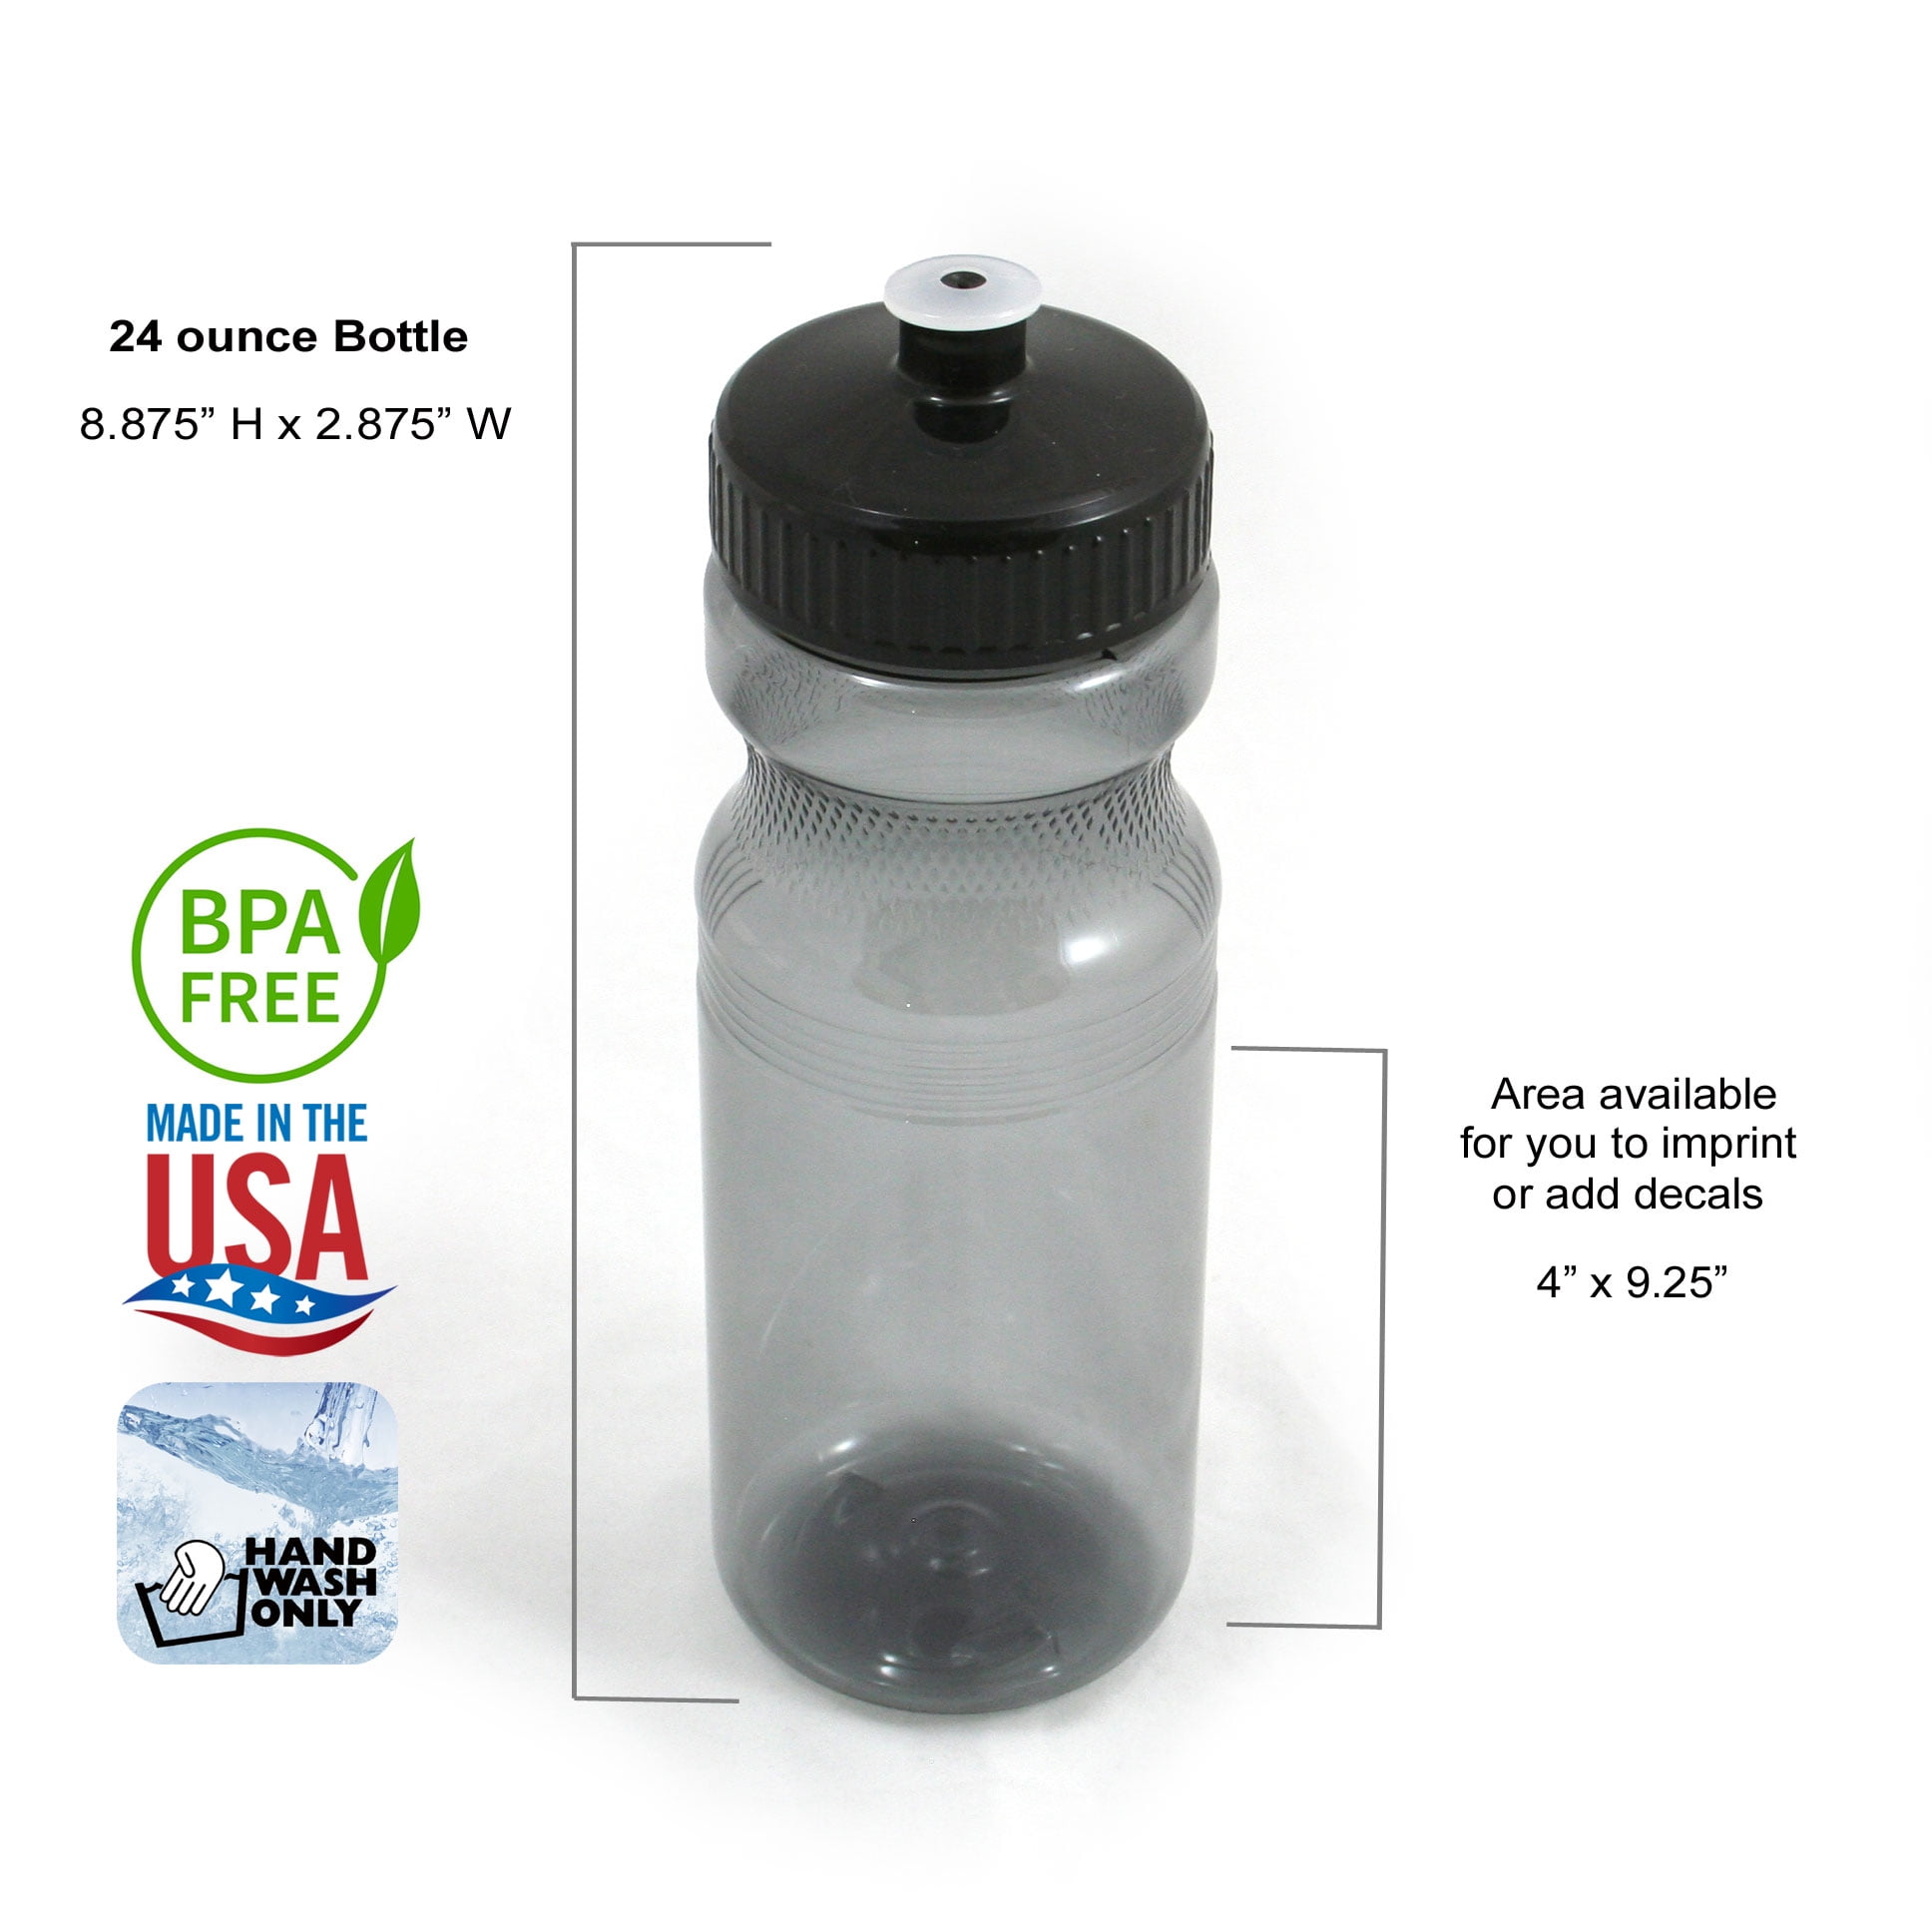 Rolling Sands BPA-Free 24 Ounce Clear/Rainbow Water Bottles, Bulk 30 Pack, Made in USA